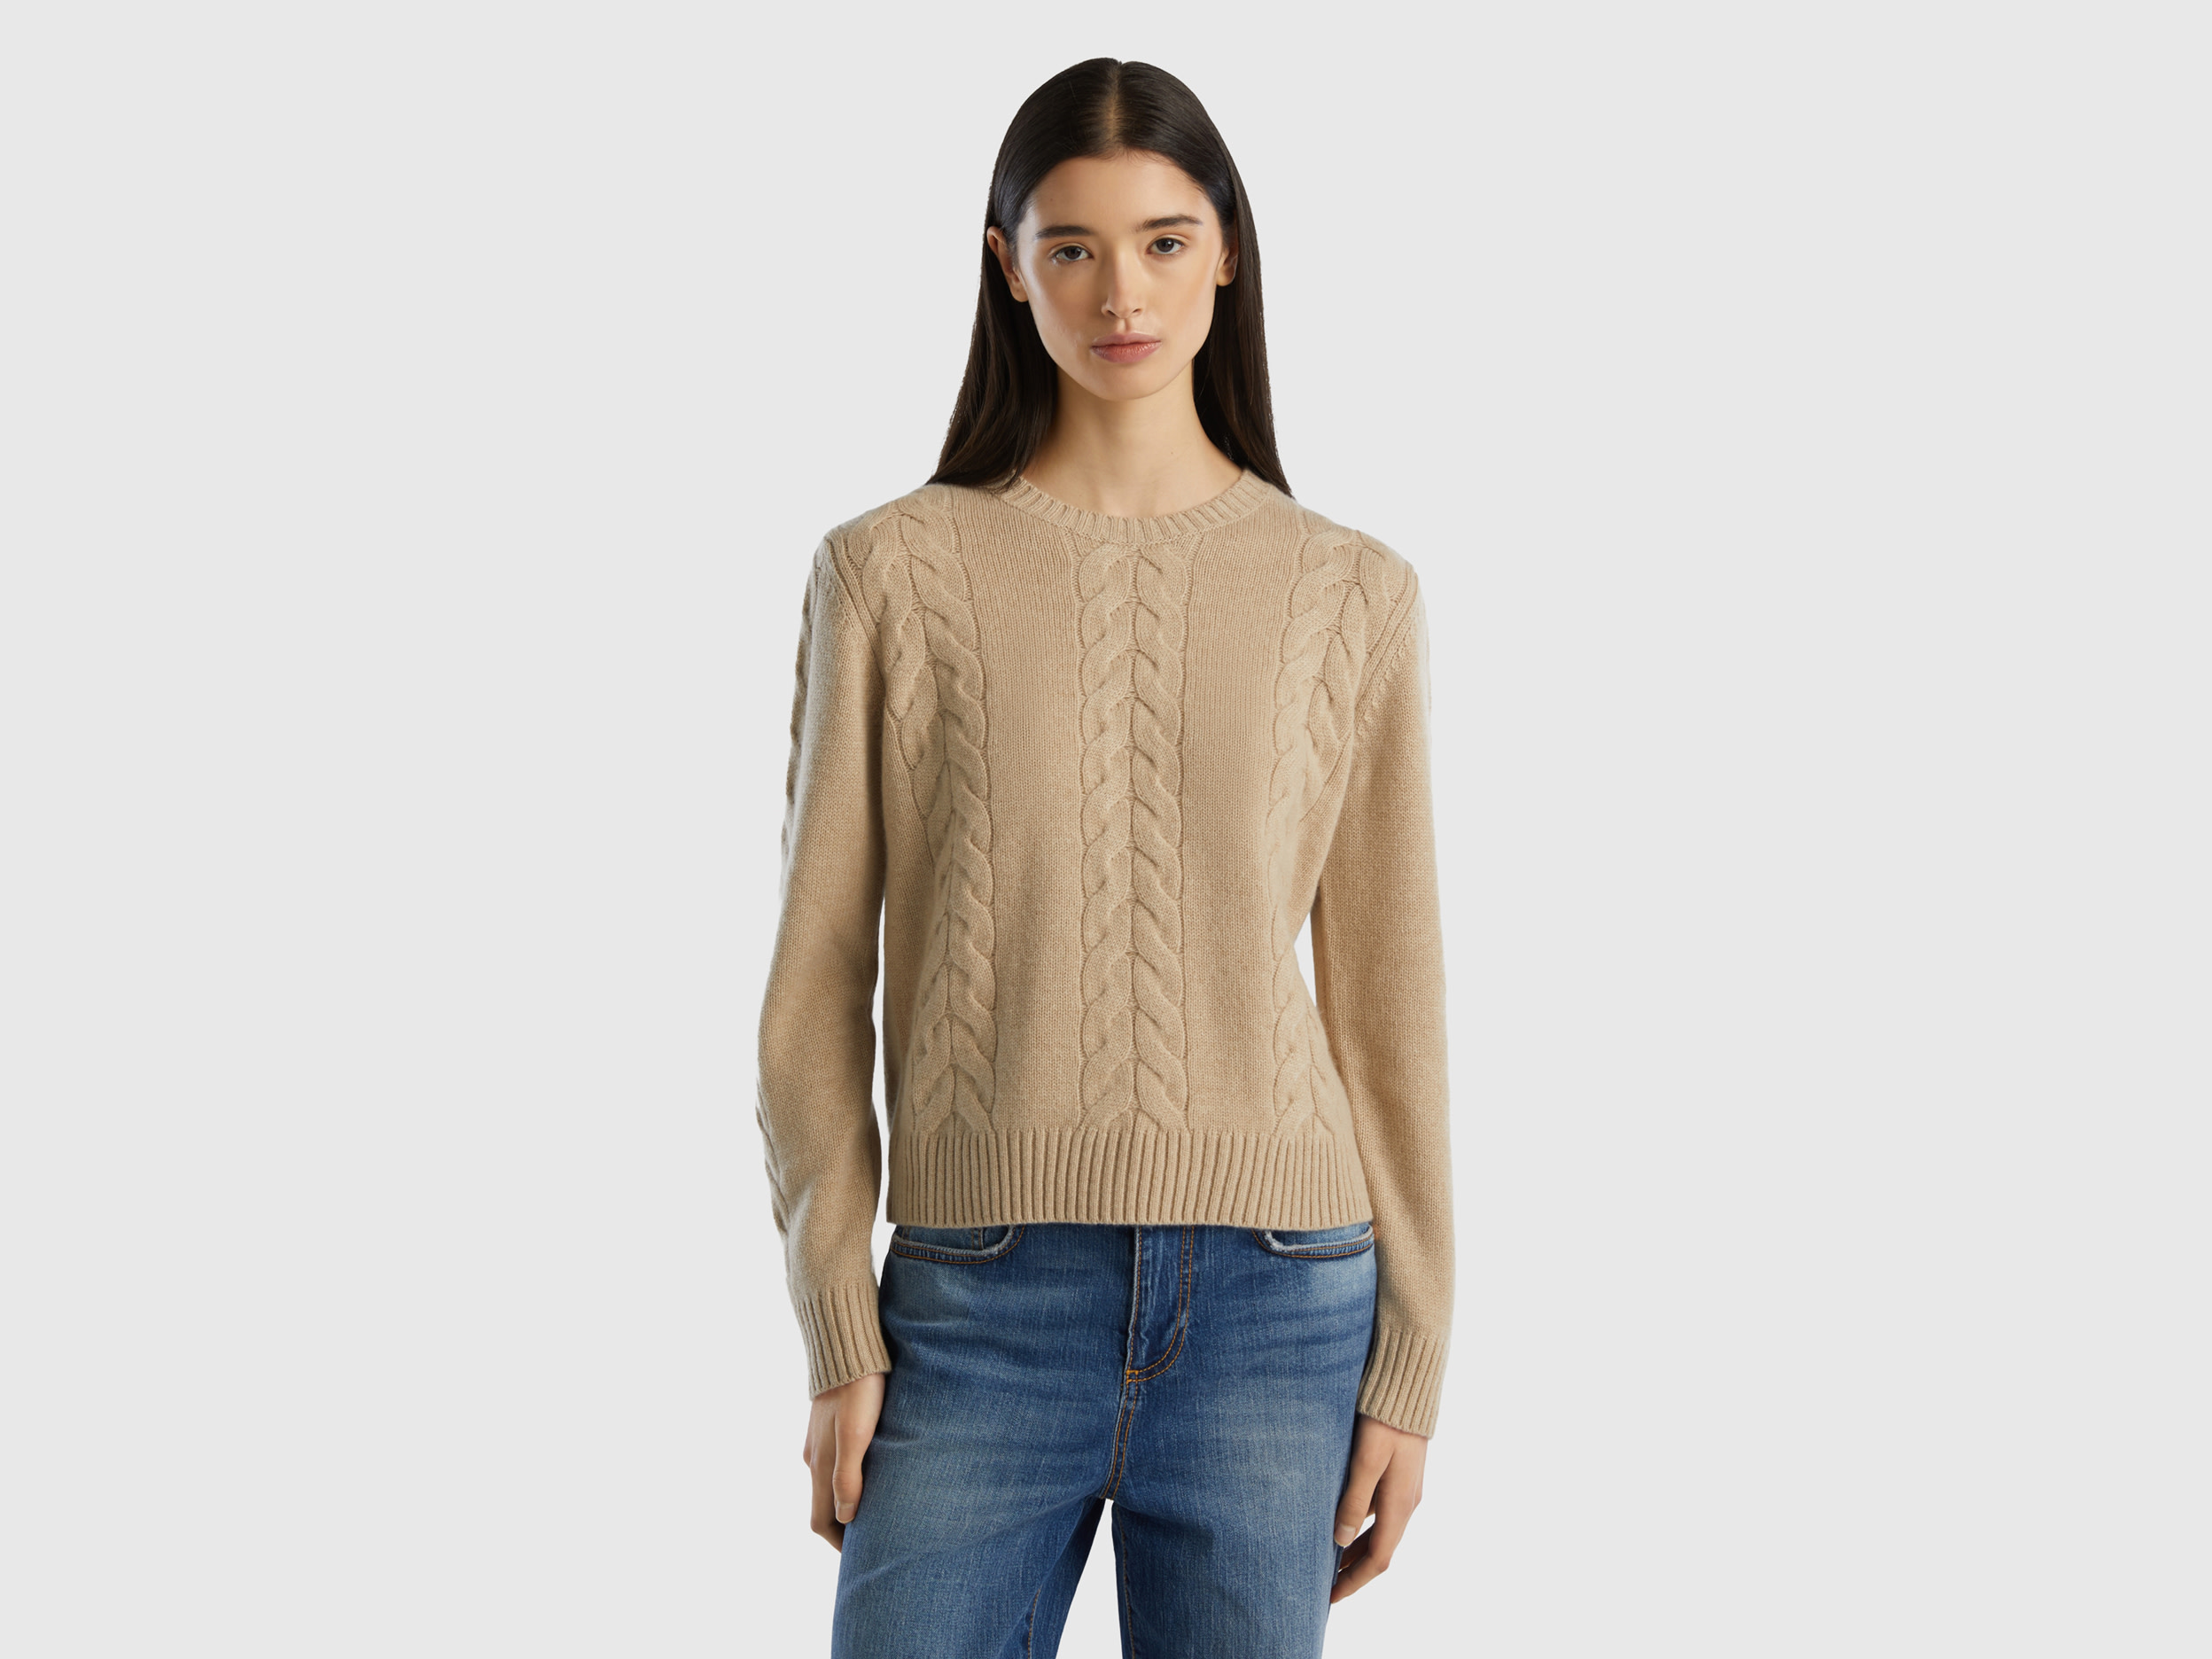 Benetton, Cable Knit Sweater In Pure Cashmere, size L, Beige, Women